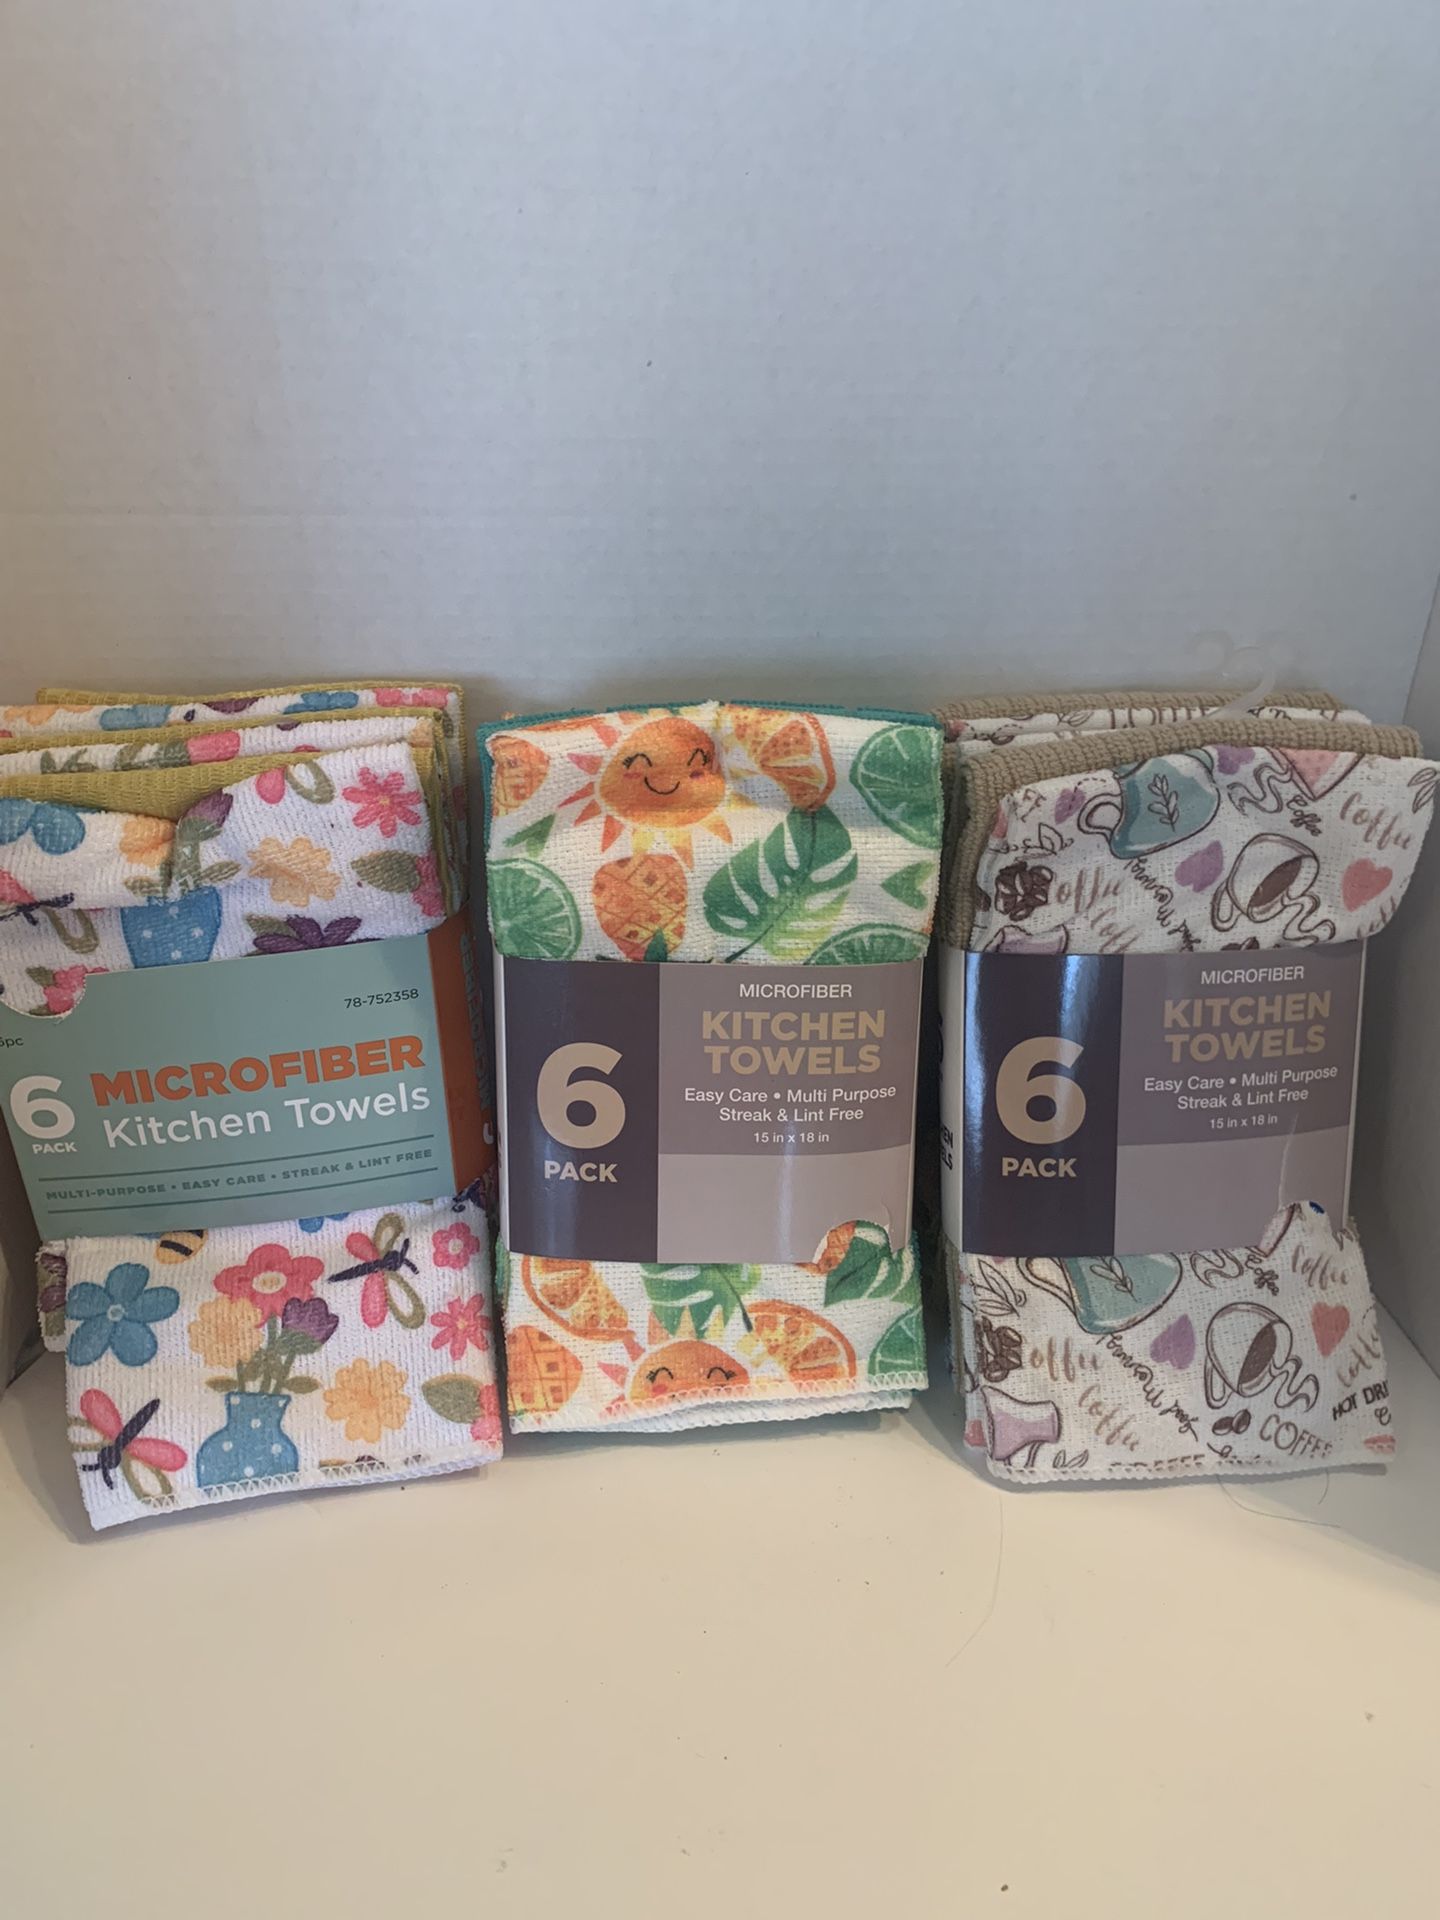 Six pack Microfiber kitchen towels multipurpose easy care streak and lint free three different styles $5 Each 